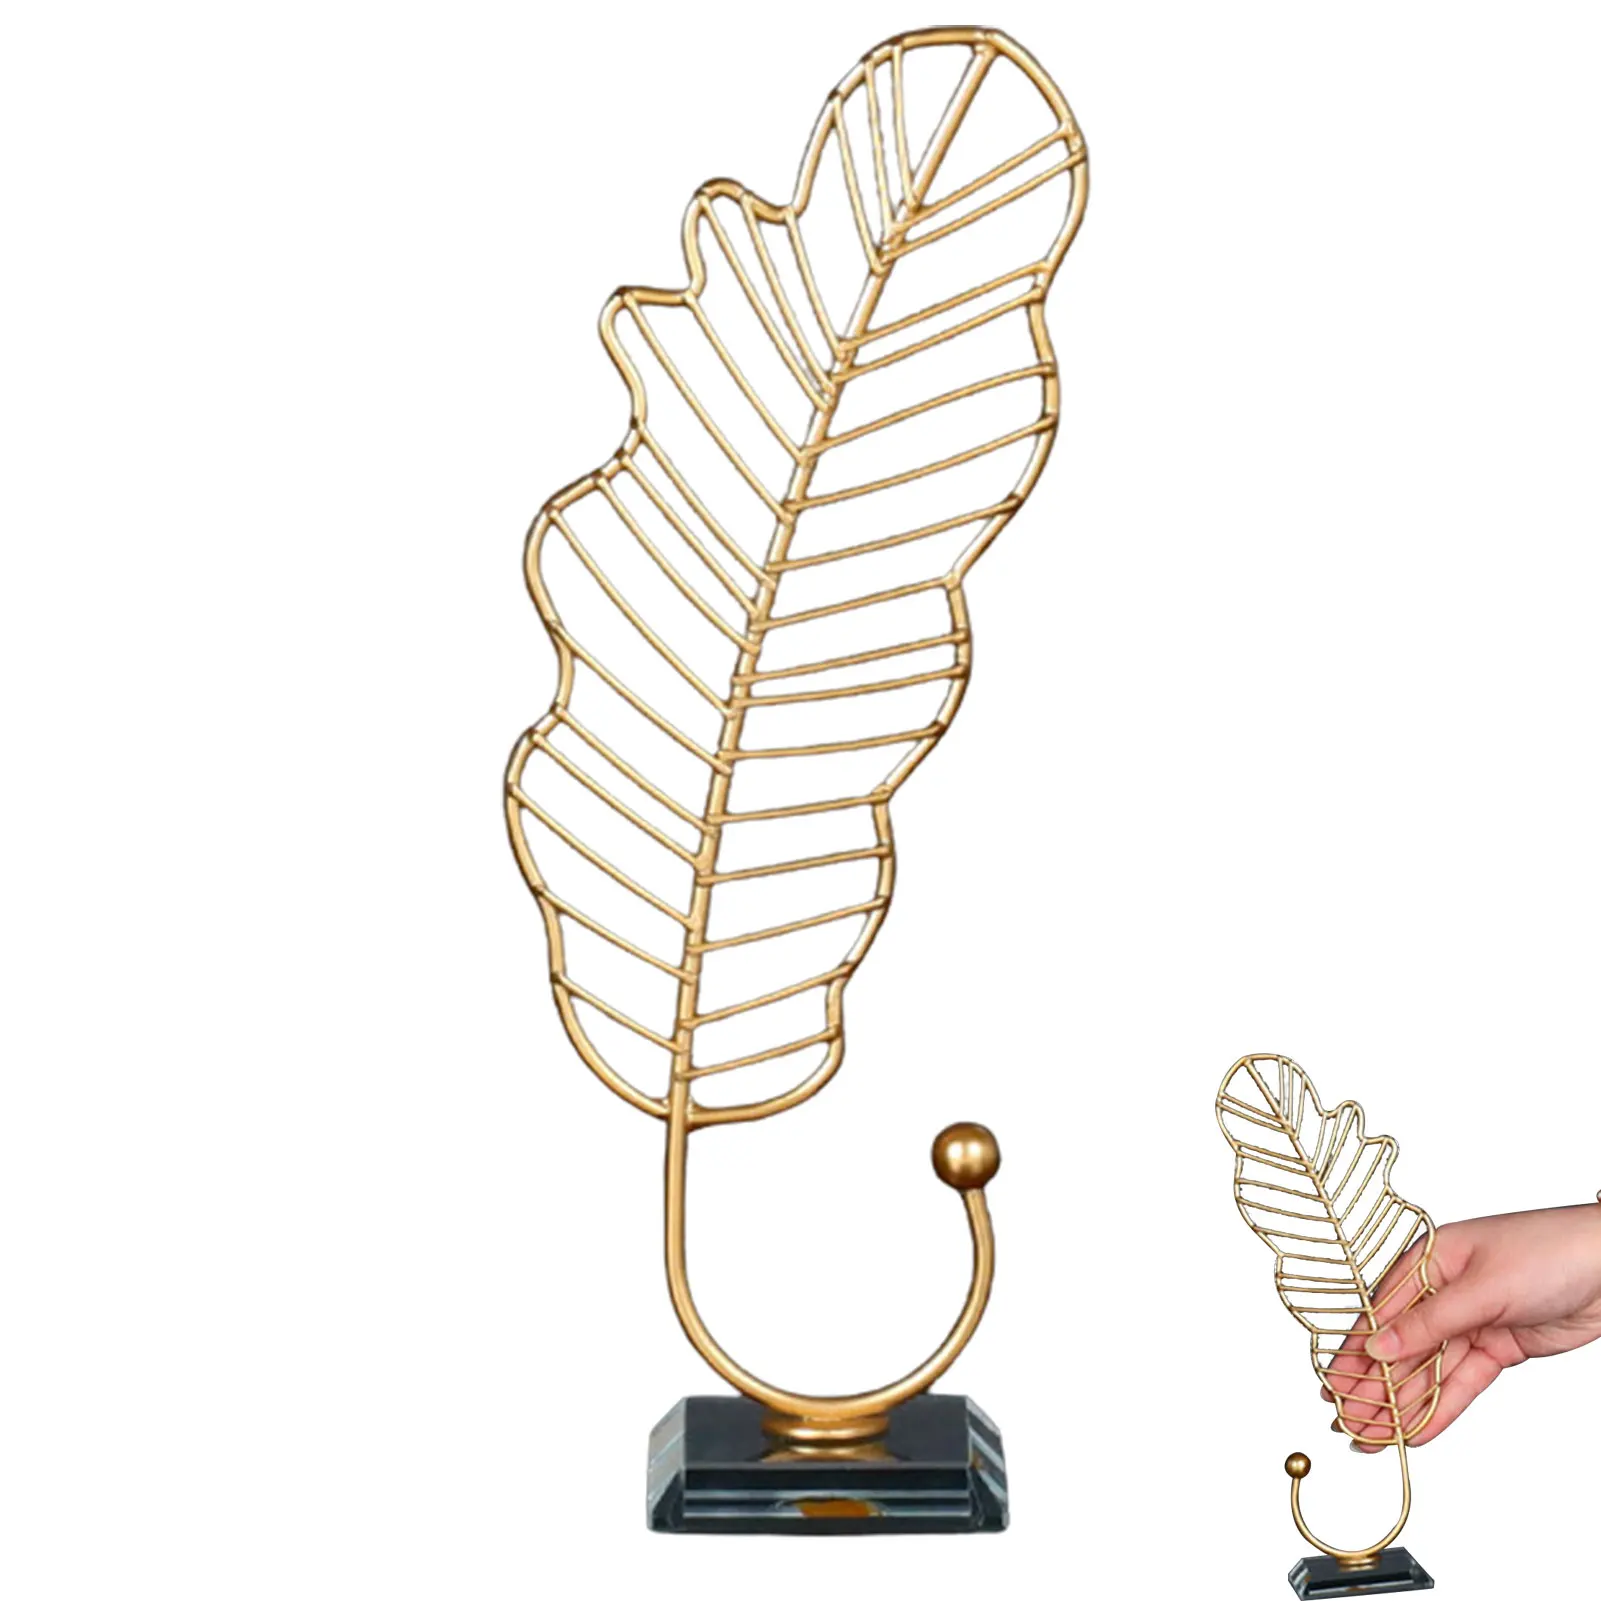 

Modern Feather Ornament Decorative Knick Knacks Metal Figurines Vintage Crafts Feathers Sculpture for Home Office Decoration